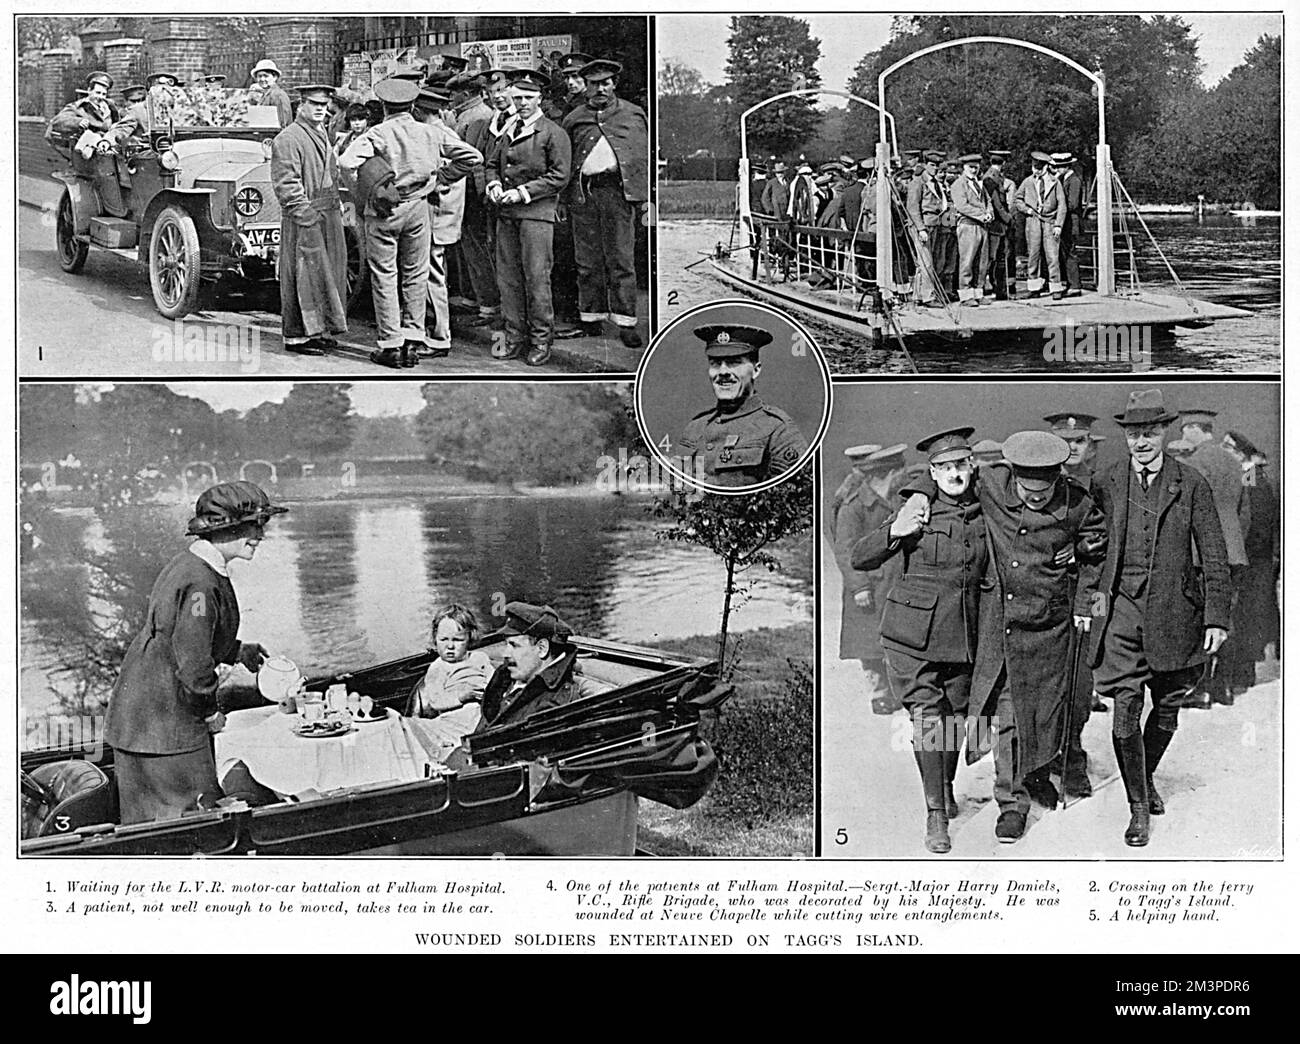 Men taken out on a trip by the London Volunteer Rifles who offered large parties of wounded soldiers from London hospitals trips into the country, entertaining them at golf clubs, athletic grounds private houses etc.  This particular trip shows over two hundred men visiting Tagg's Island as the guest of an anonymous gentleman.  1.  Waiting for the LVR motor car battalion at Fulham Hospital.  2.  Crossing on the ferry to Tagg's Island.  3.  A patient not well enough to be moved, takes tea in the car.  4.  One of the patients of Fulham Hospital - Sergt. Major Harry Daniels V.C., Rifle Brigade, w Stock Photo